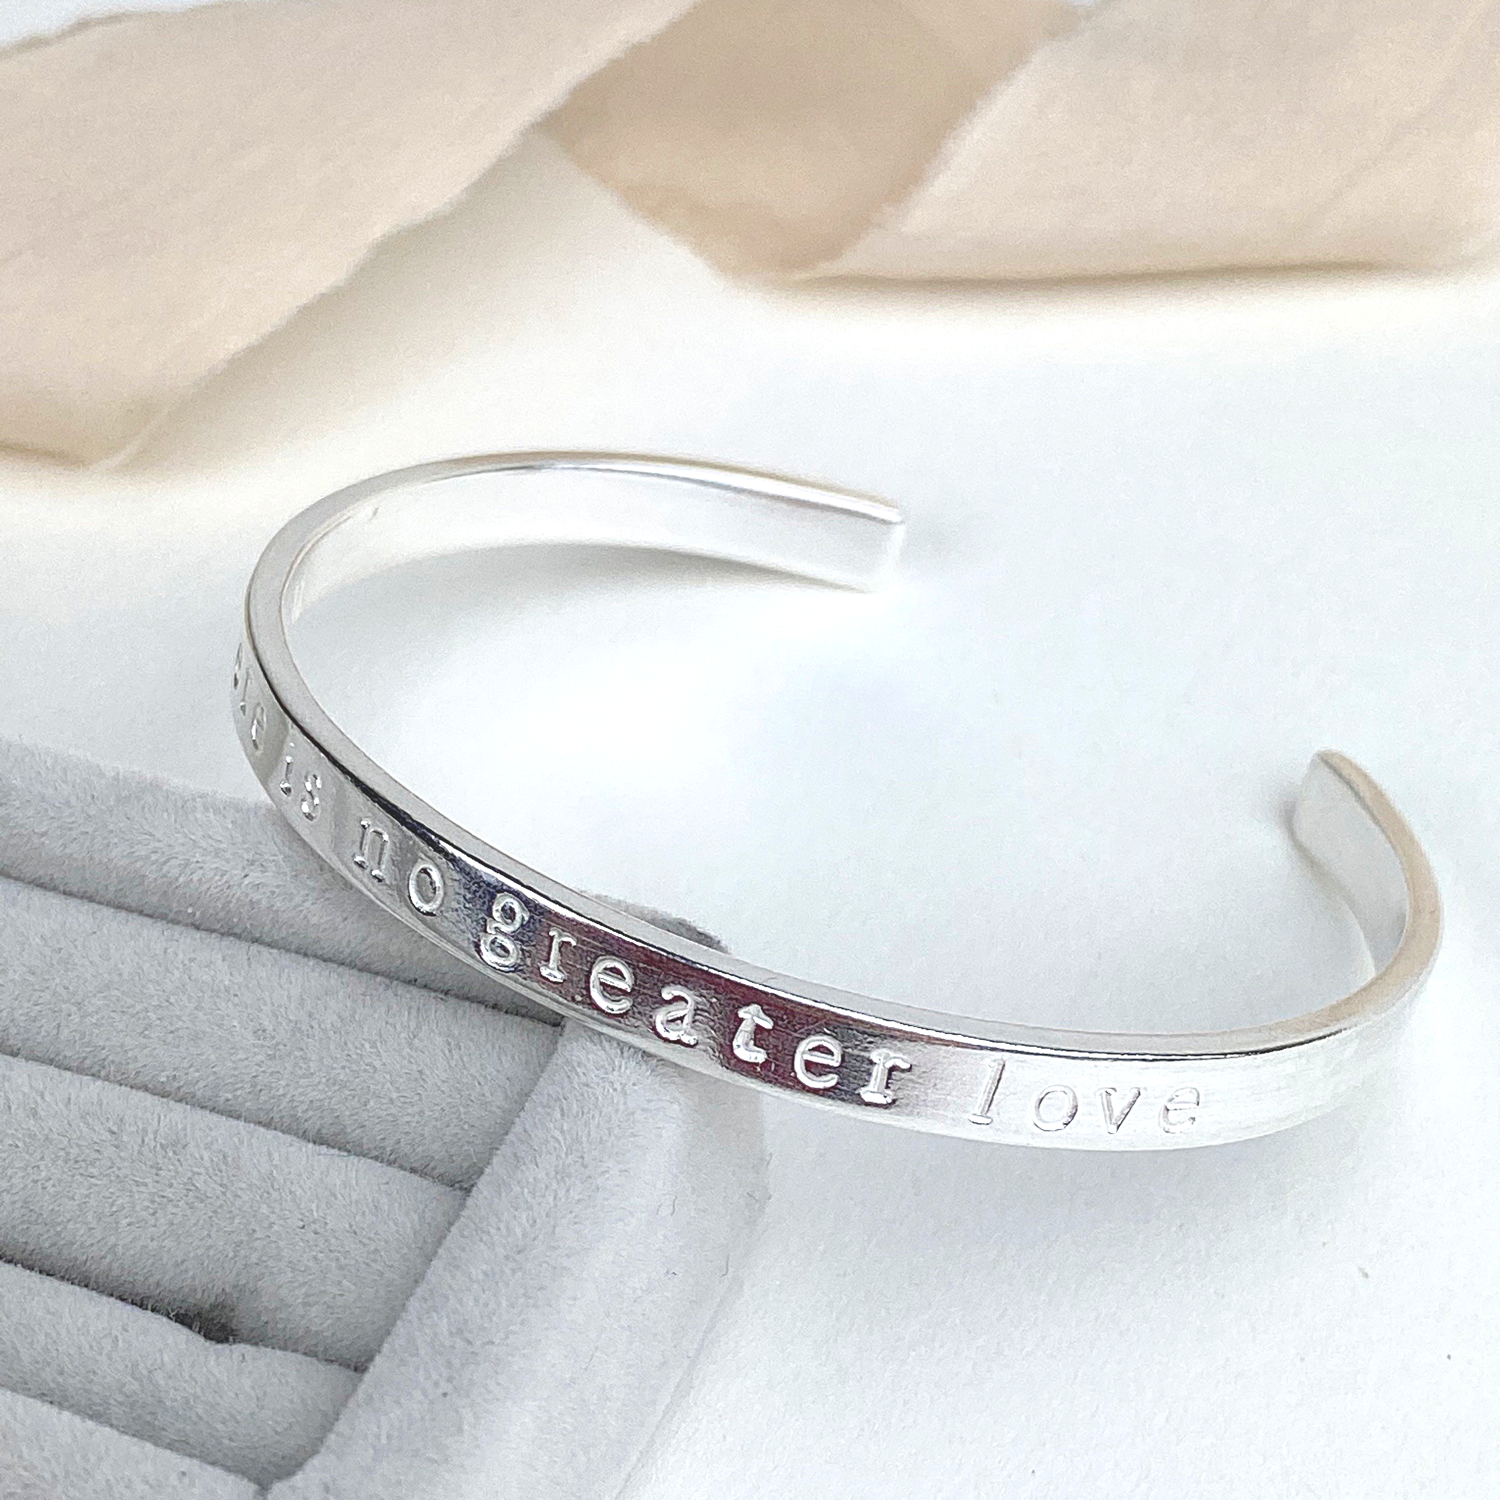 The Winn Personalised Cuff Bangle - sterling silver personalised bracelet - hand stamped secret message cuff bangle